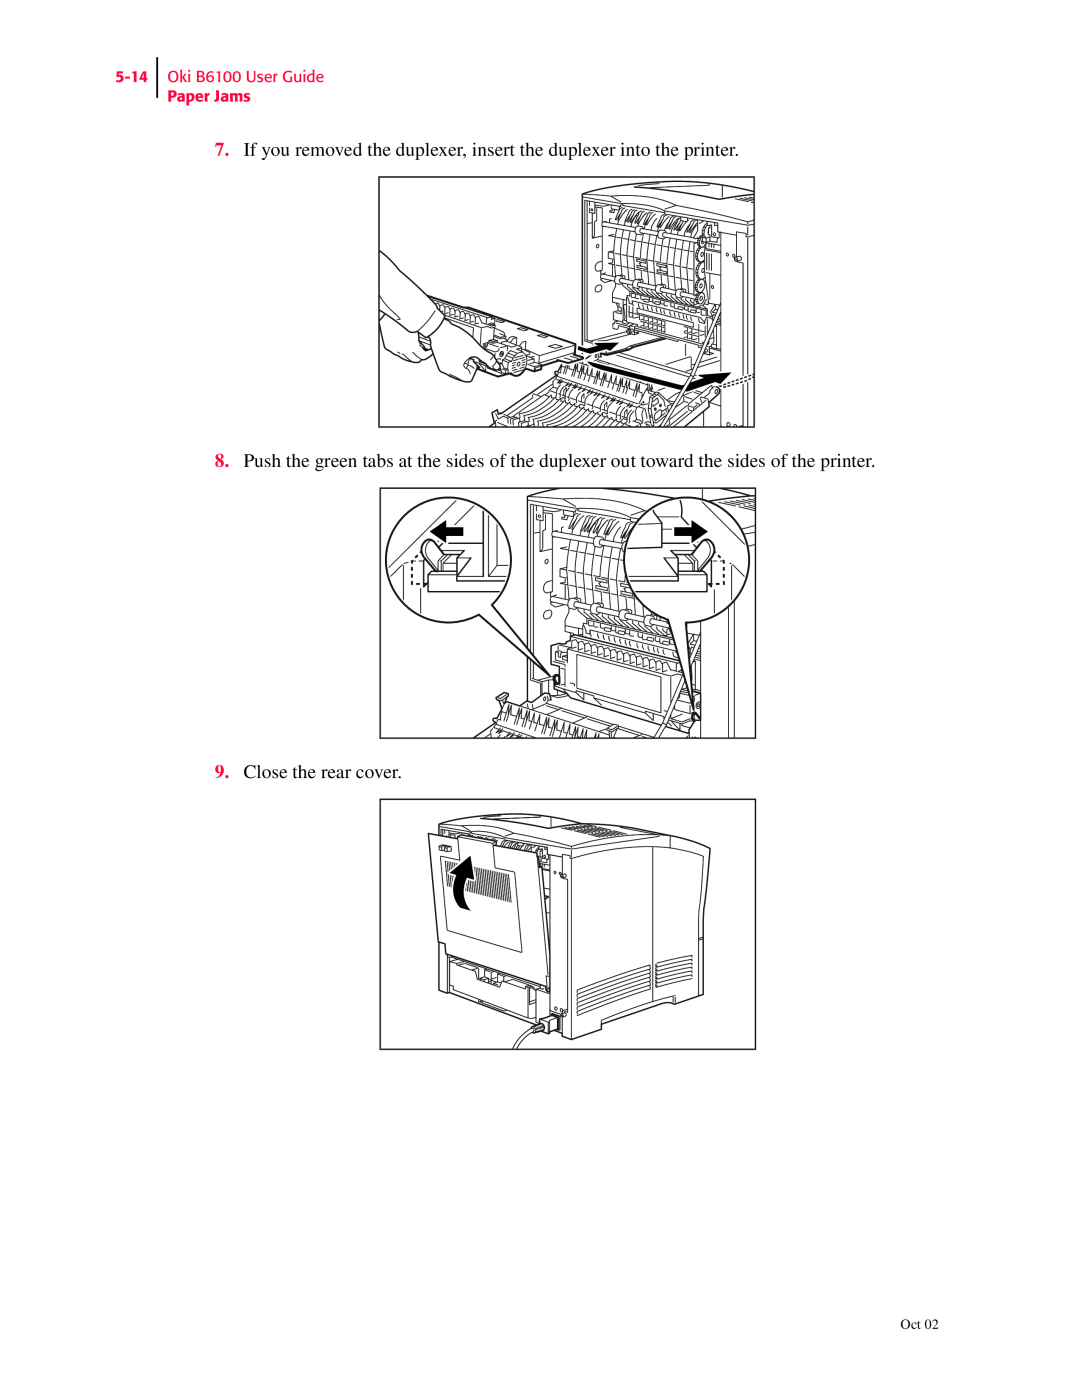 Oki 6100 manual If you removed the duplexer, insert the duplexer into the printer, Close the rear cover 